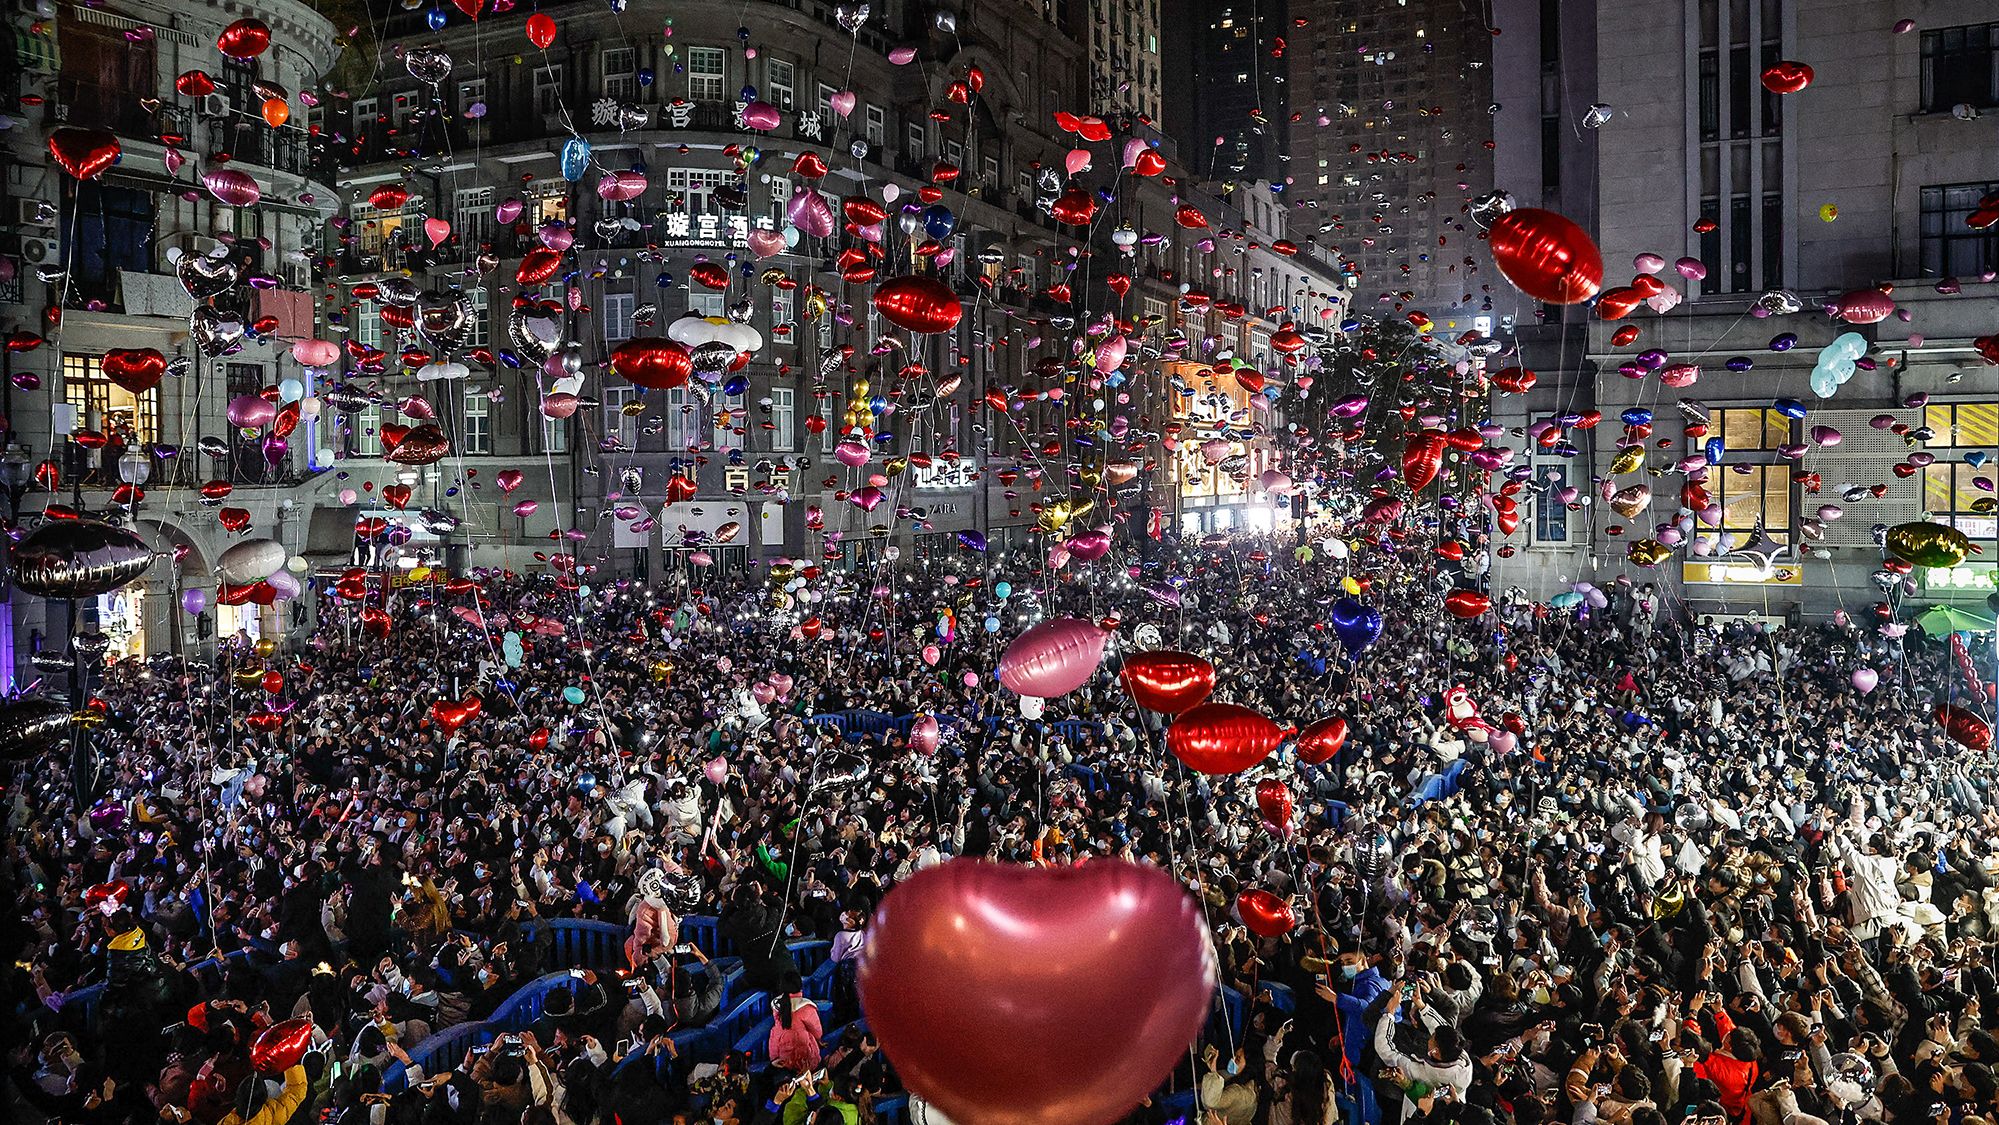 Revelers release balloons to celebrate the new year in Wuhan, China.